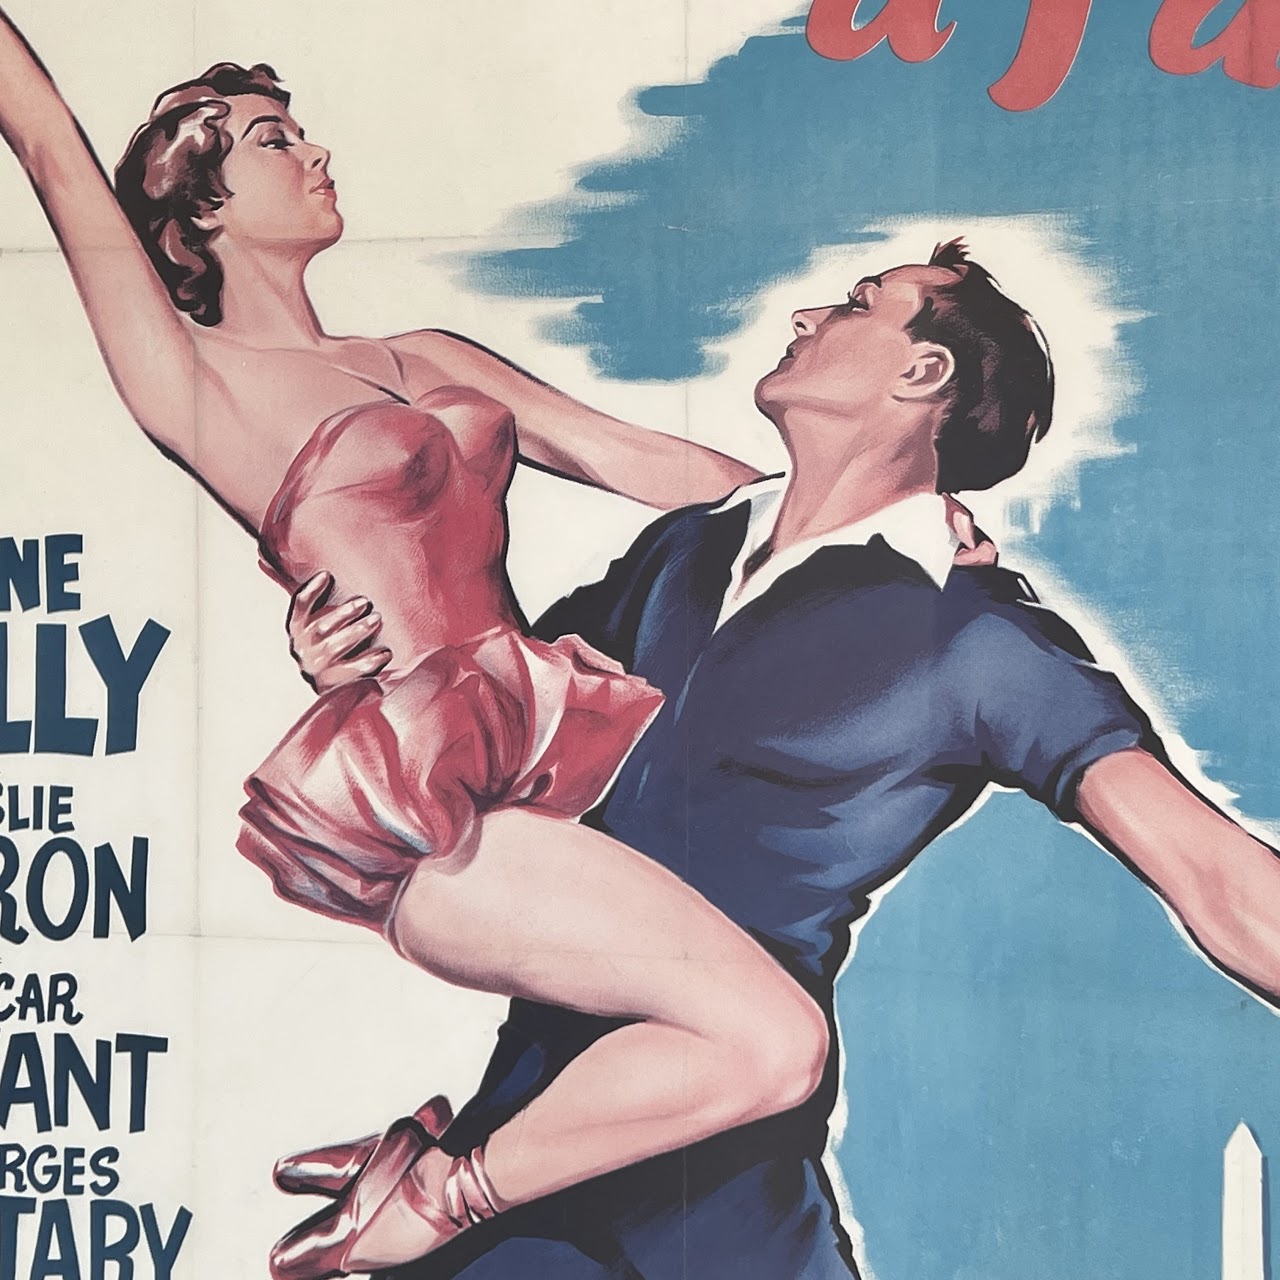 Gene Kelly 'An American in Paris' Original French Movie Poster